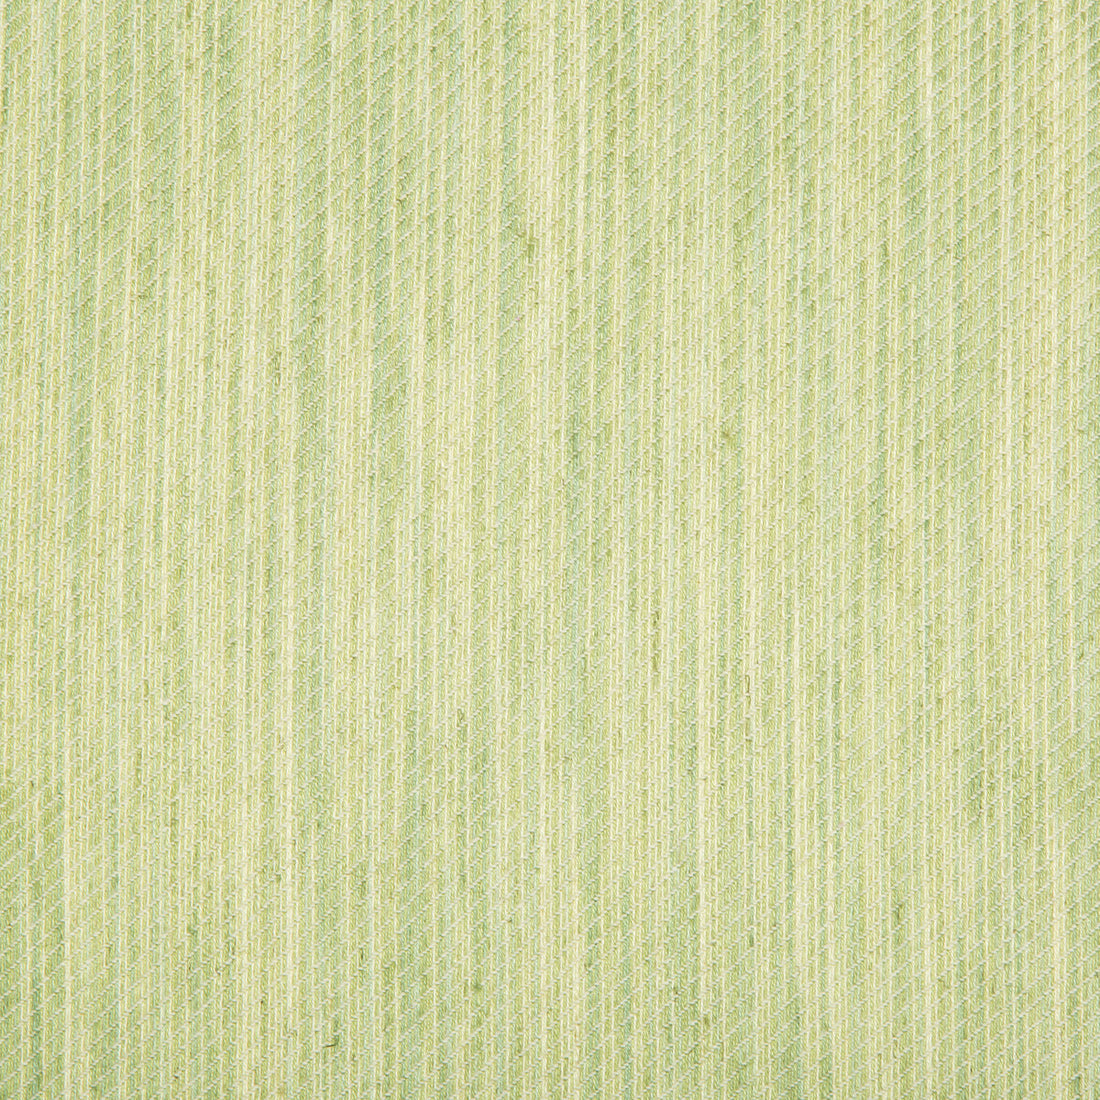 Chancellor Strie II fabric in sage color - pattern 8017138.3.0 - by Brunschwig &amp; Fils in the Baronet collection